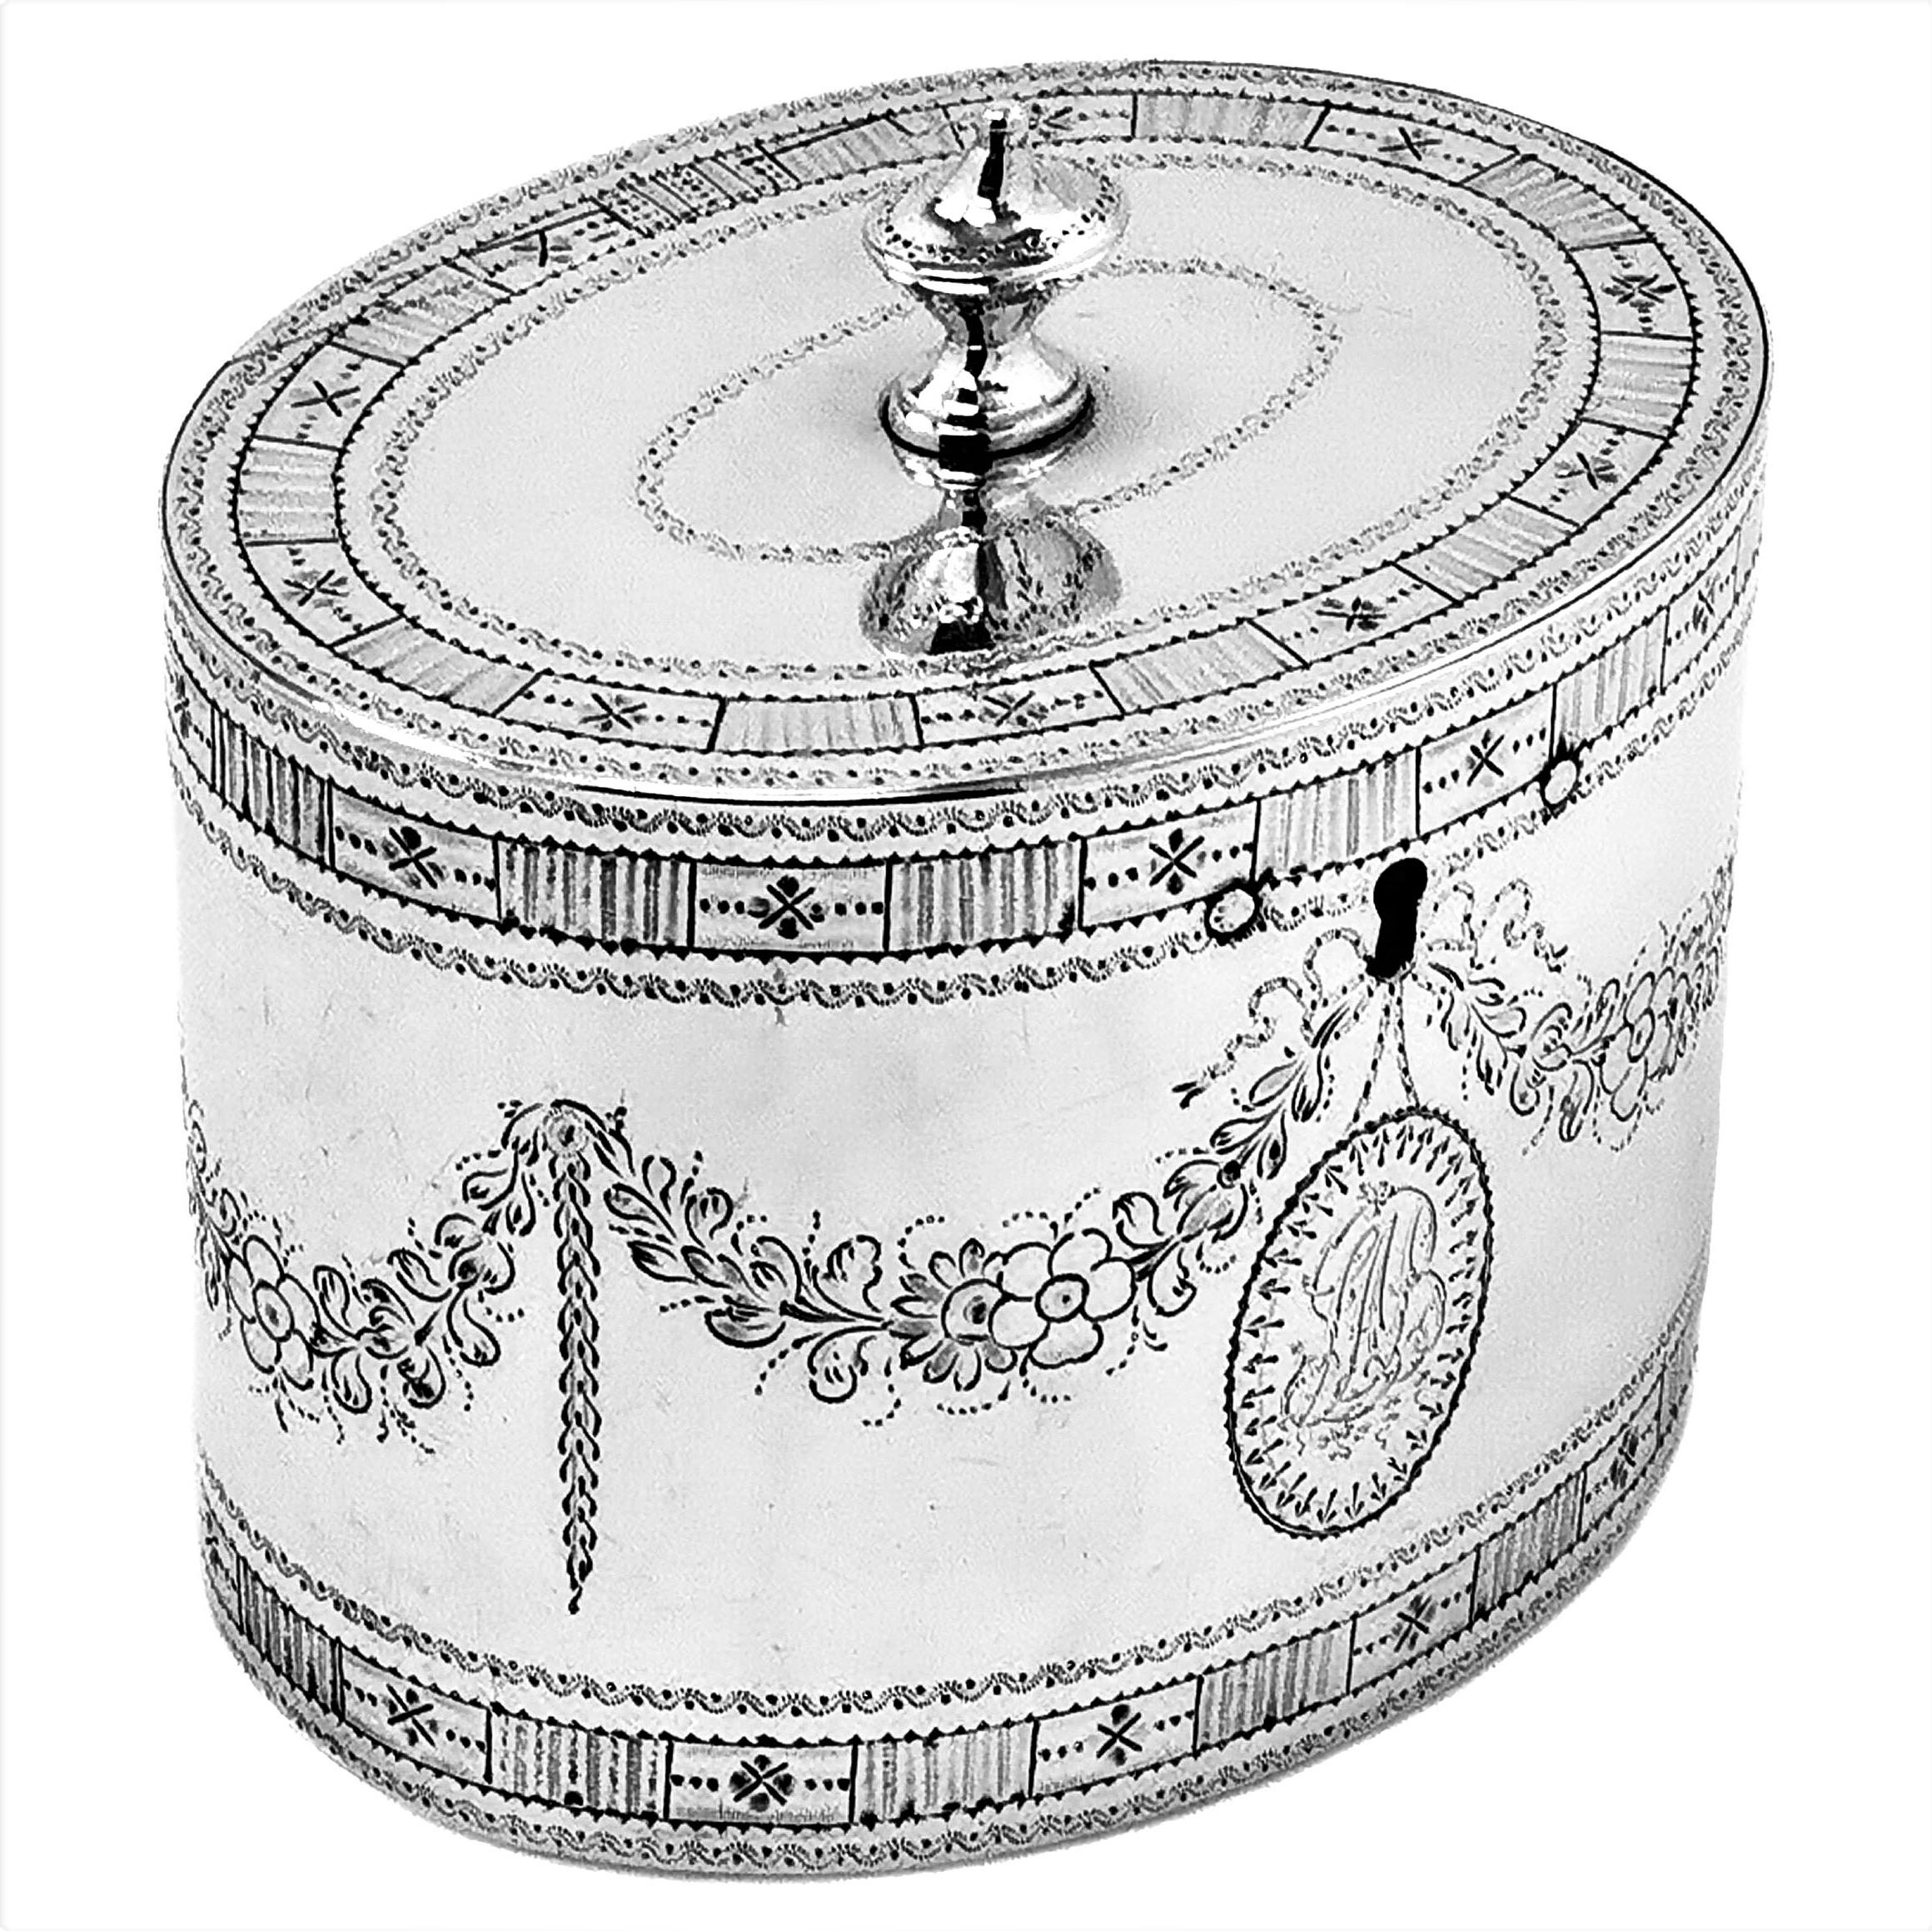 A beautiful Antique George III is a classic oval can shape Tea Caddy and is decorated with an ornate engraved border on both top & bottom rims of the body and around the rims of the lid. The body of the Caddy also includes a floral swag and bow